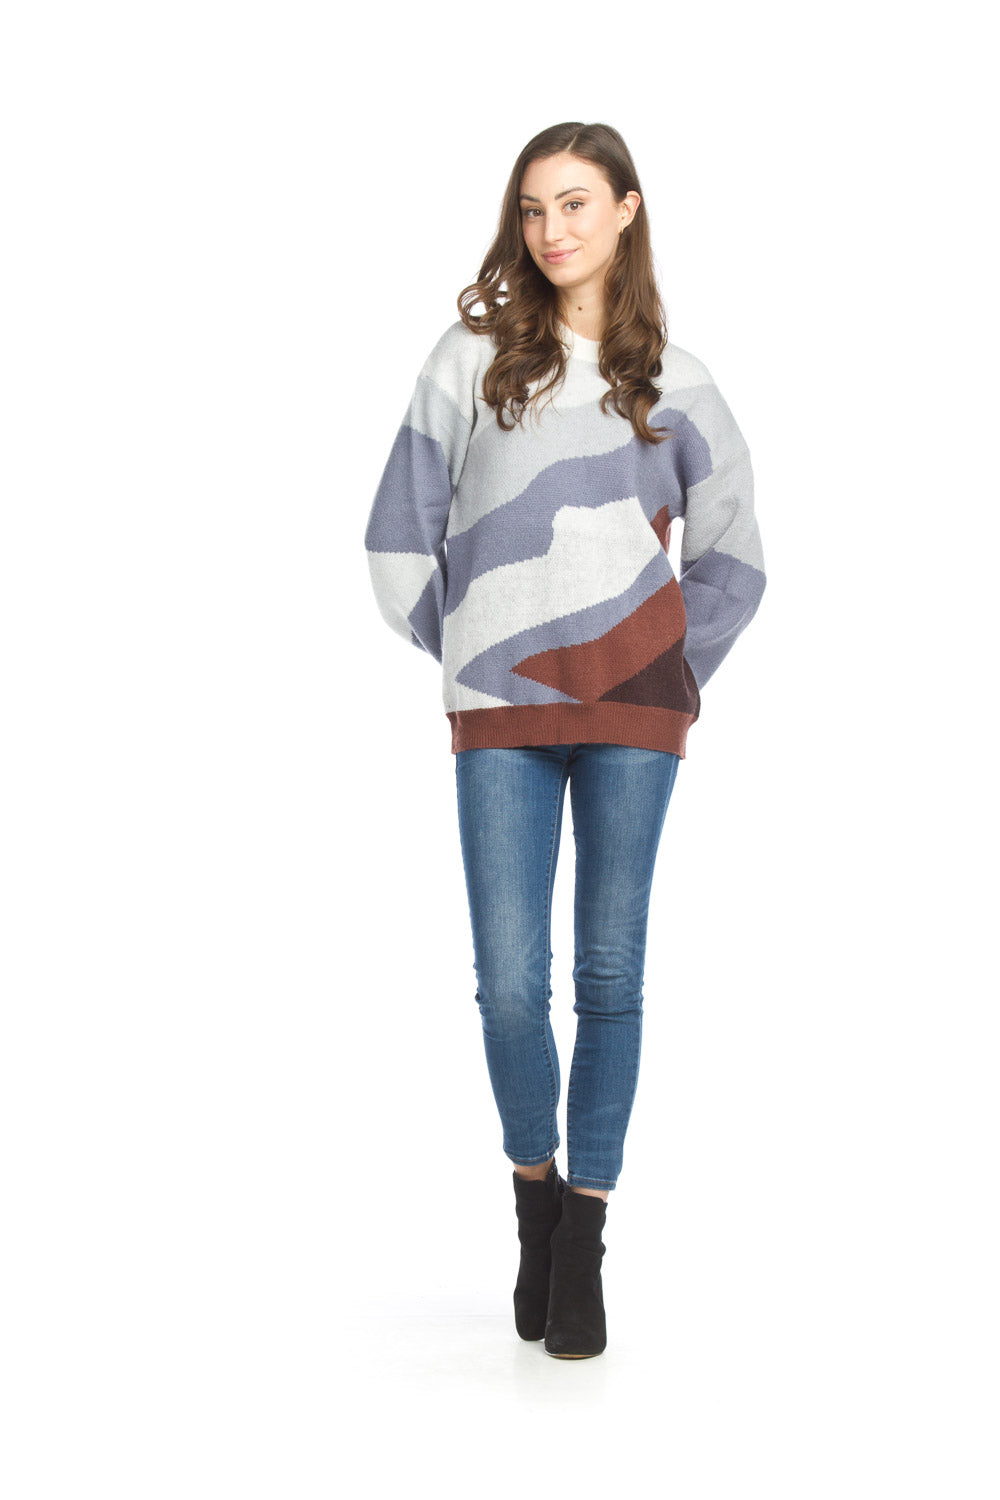 ST-13211 - Abstract Scenic Knit Sweater